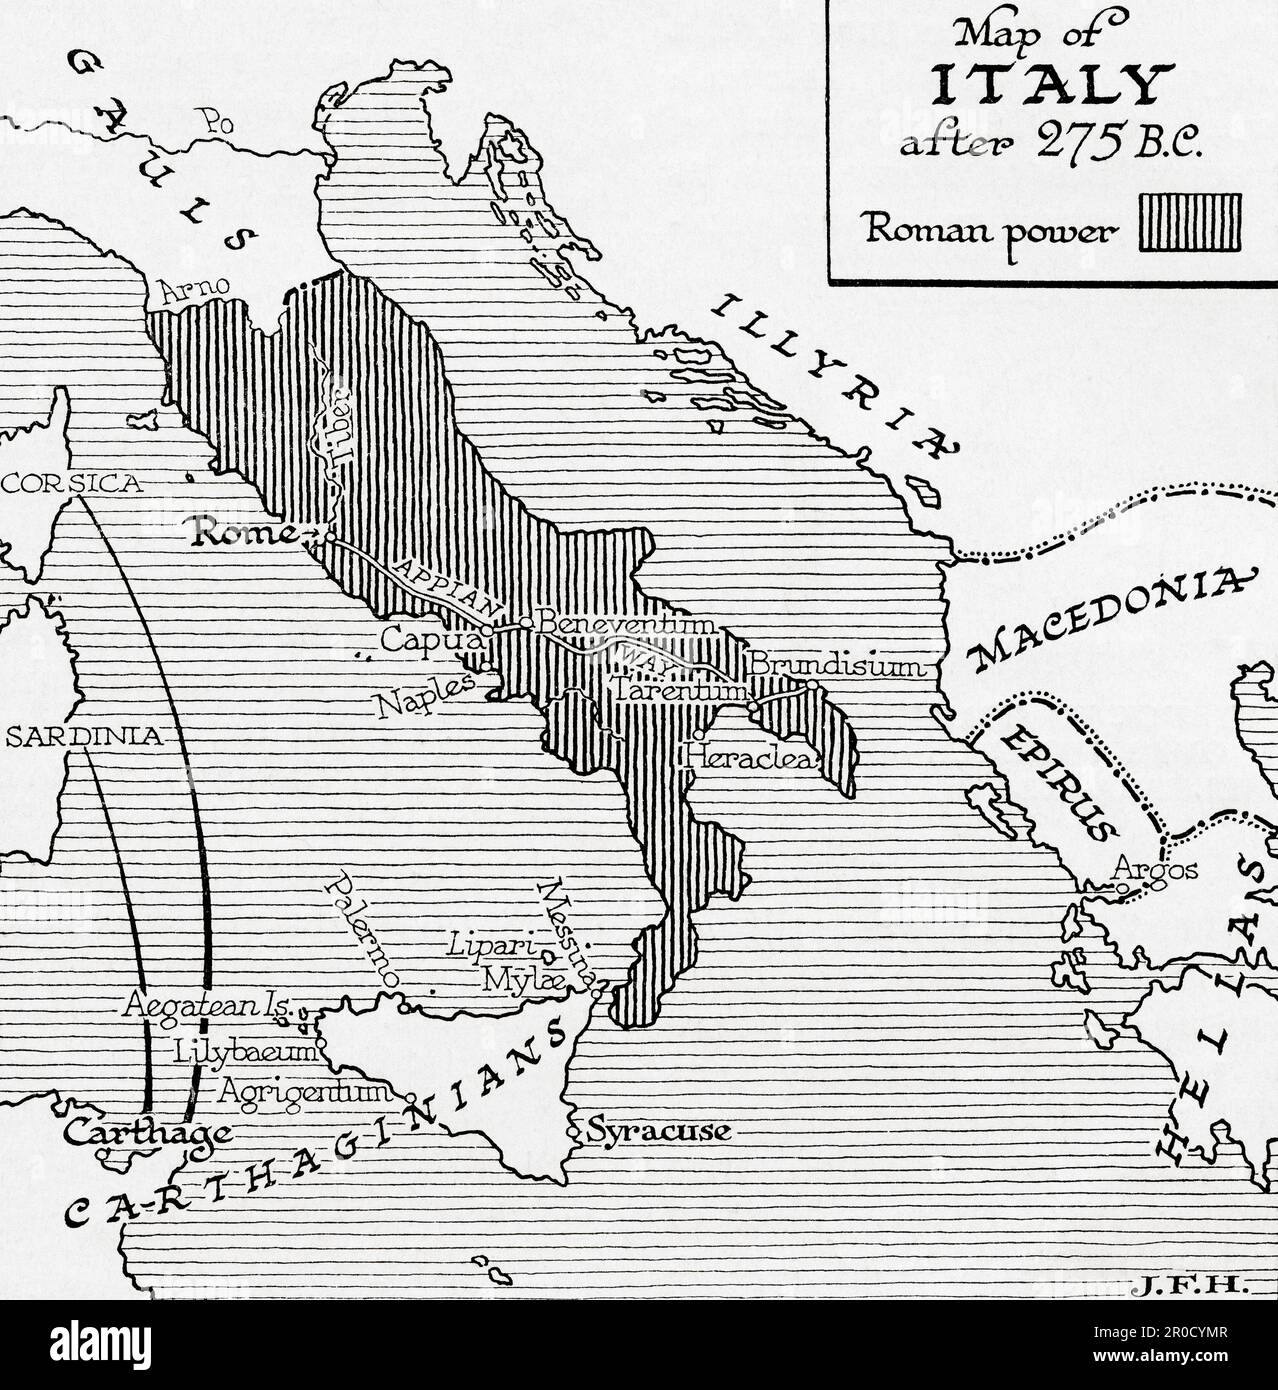 Map of Italy after 275 BC.  From the book Outline of History by H.G. Wells, published 1920. Stock Photo